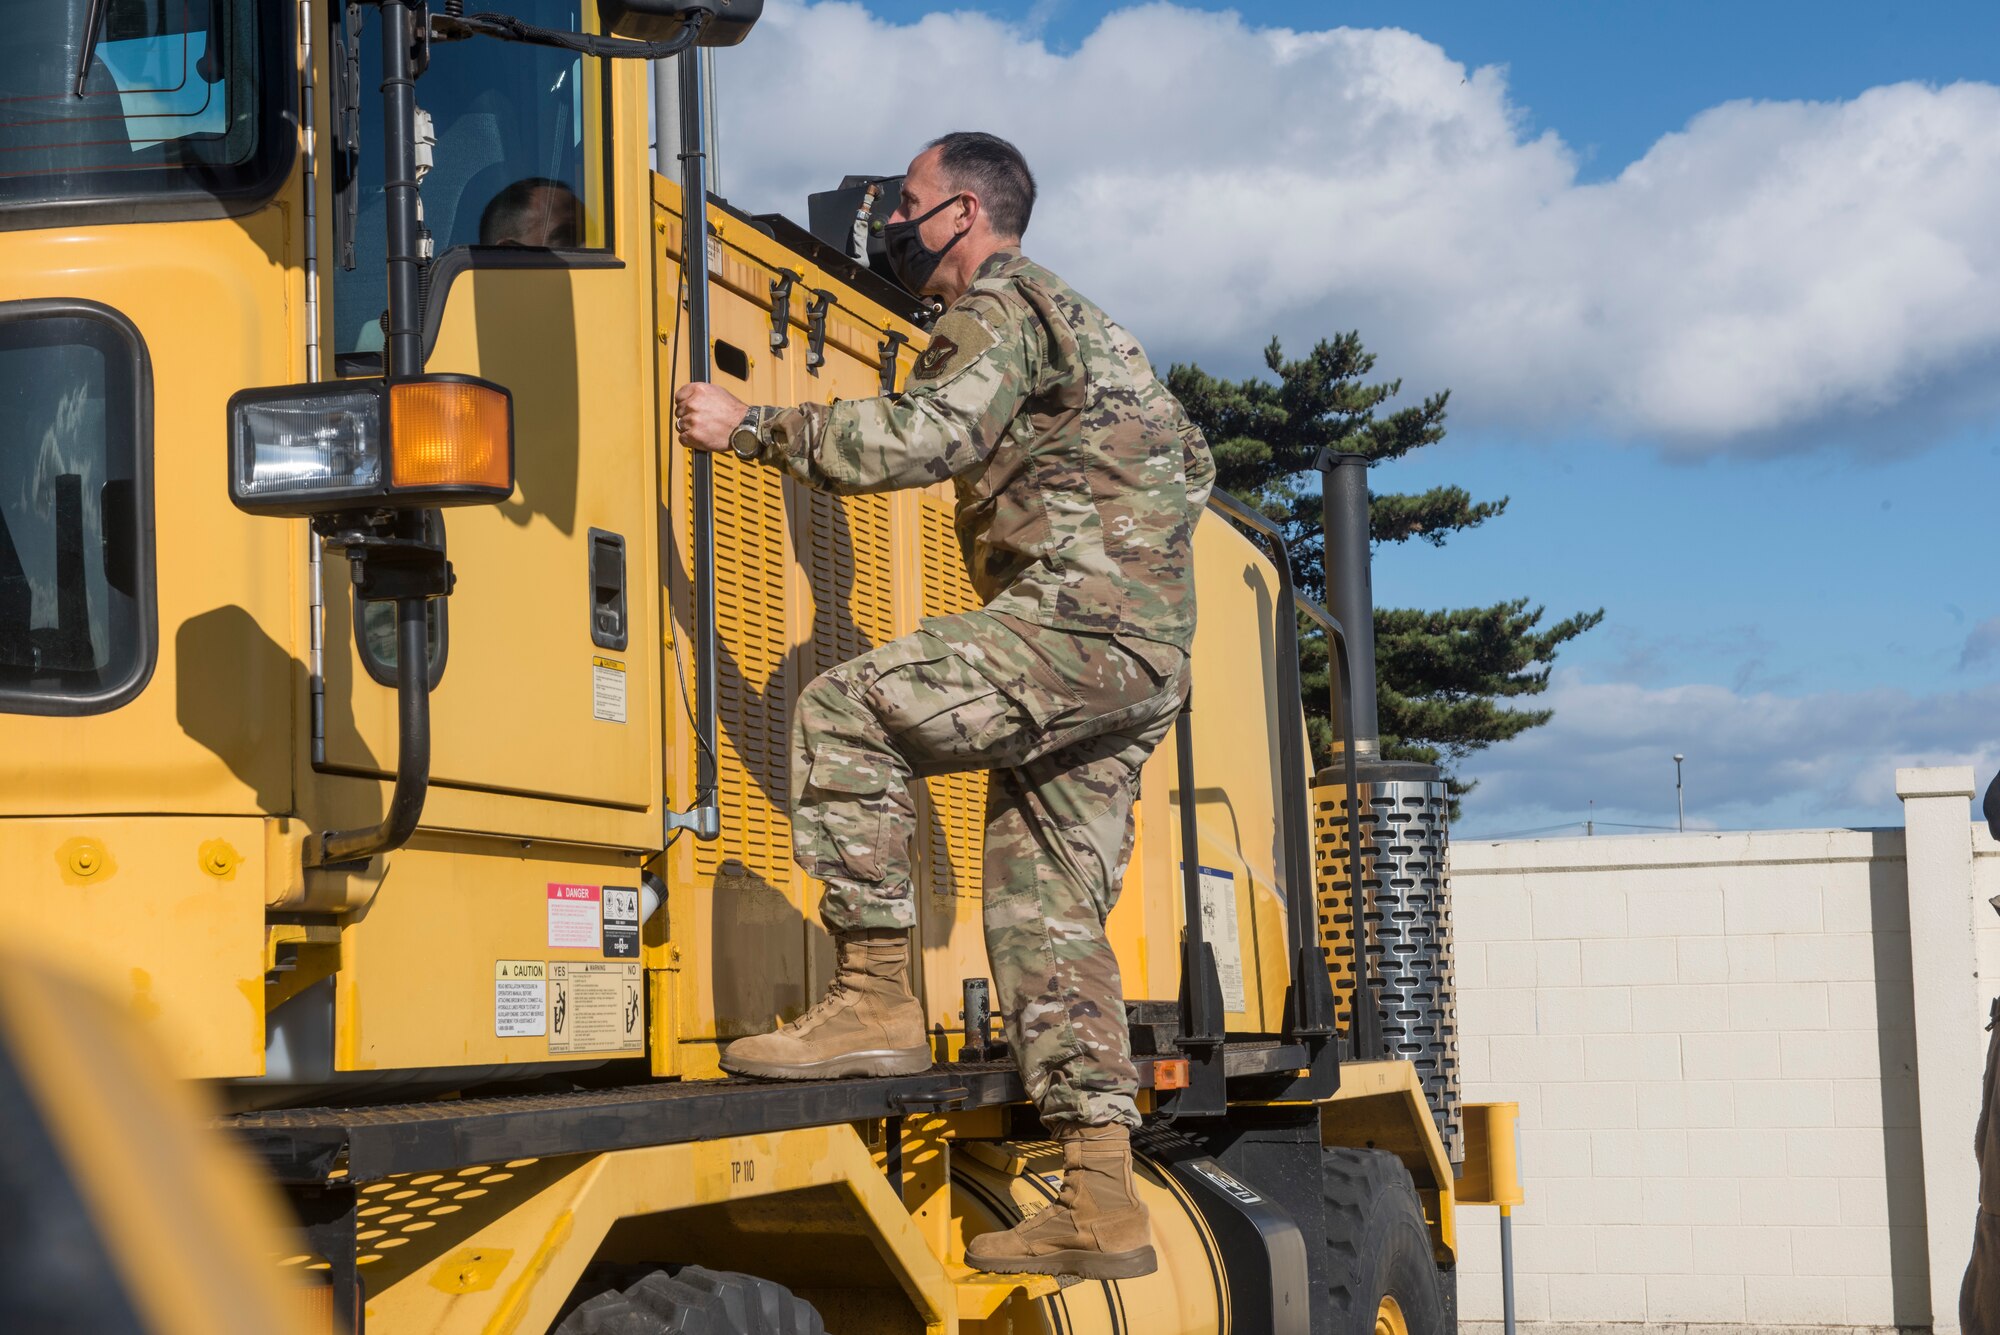 U.S. Air Force Brig. Gen. Leonard J. Kosinski, the 5th Air Force vice commander, enters a snow plow during the "Snow Rodeo" at Misawa Air Base, Japan, Nov. 24, 2020. The Snow Rodeo allows Airmen to participate in a friendly competition in snow clearing operations. Misawa has a strong lead on keeping the title of the snowiest air force base in the world. This keeps civil engineers busy with 24-hour operations during the snow season, ensuring the airfield is open regardless of weather conditions. (U.S. Air Force photo by Airman 1st Class Leon Redfern)